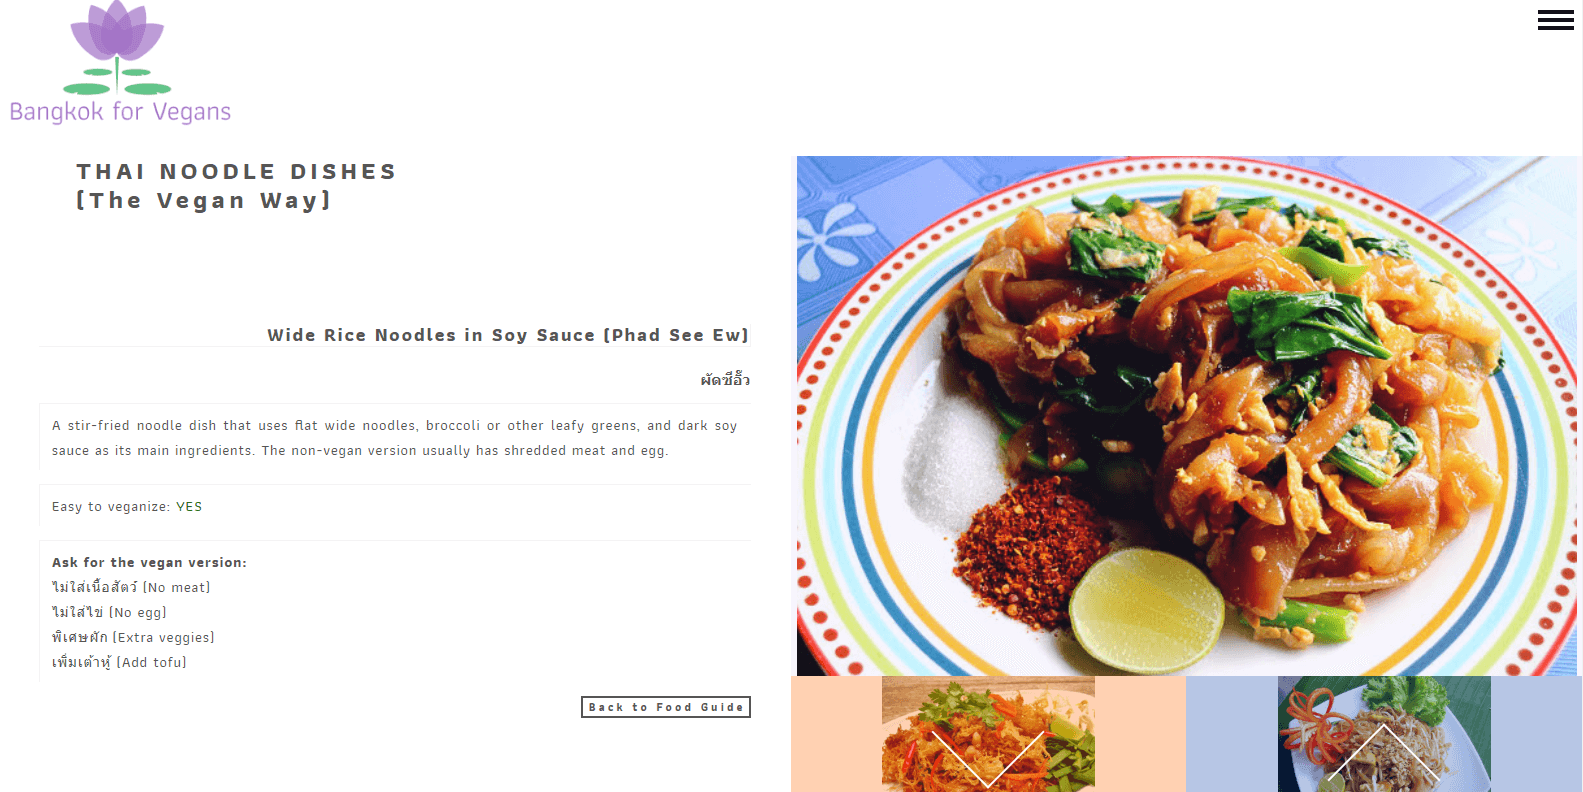 Food guide with Thai translations